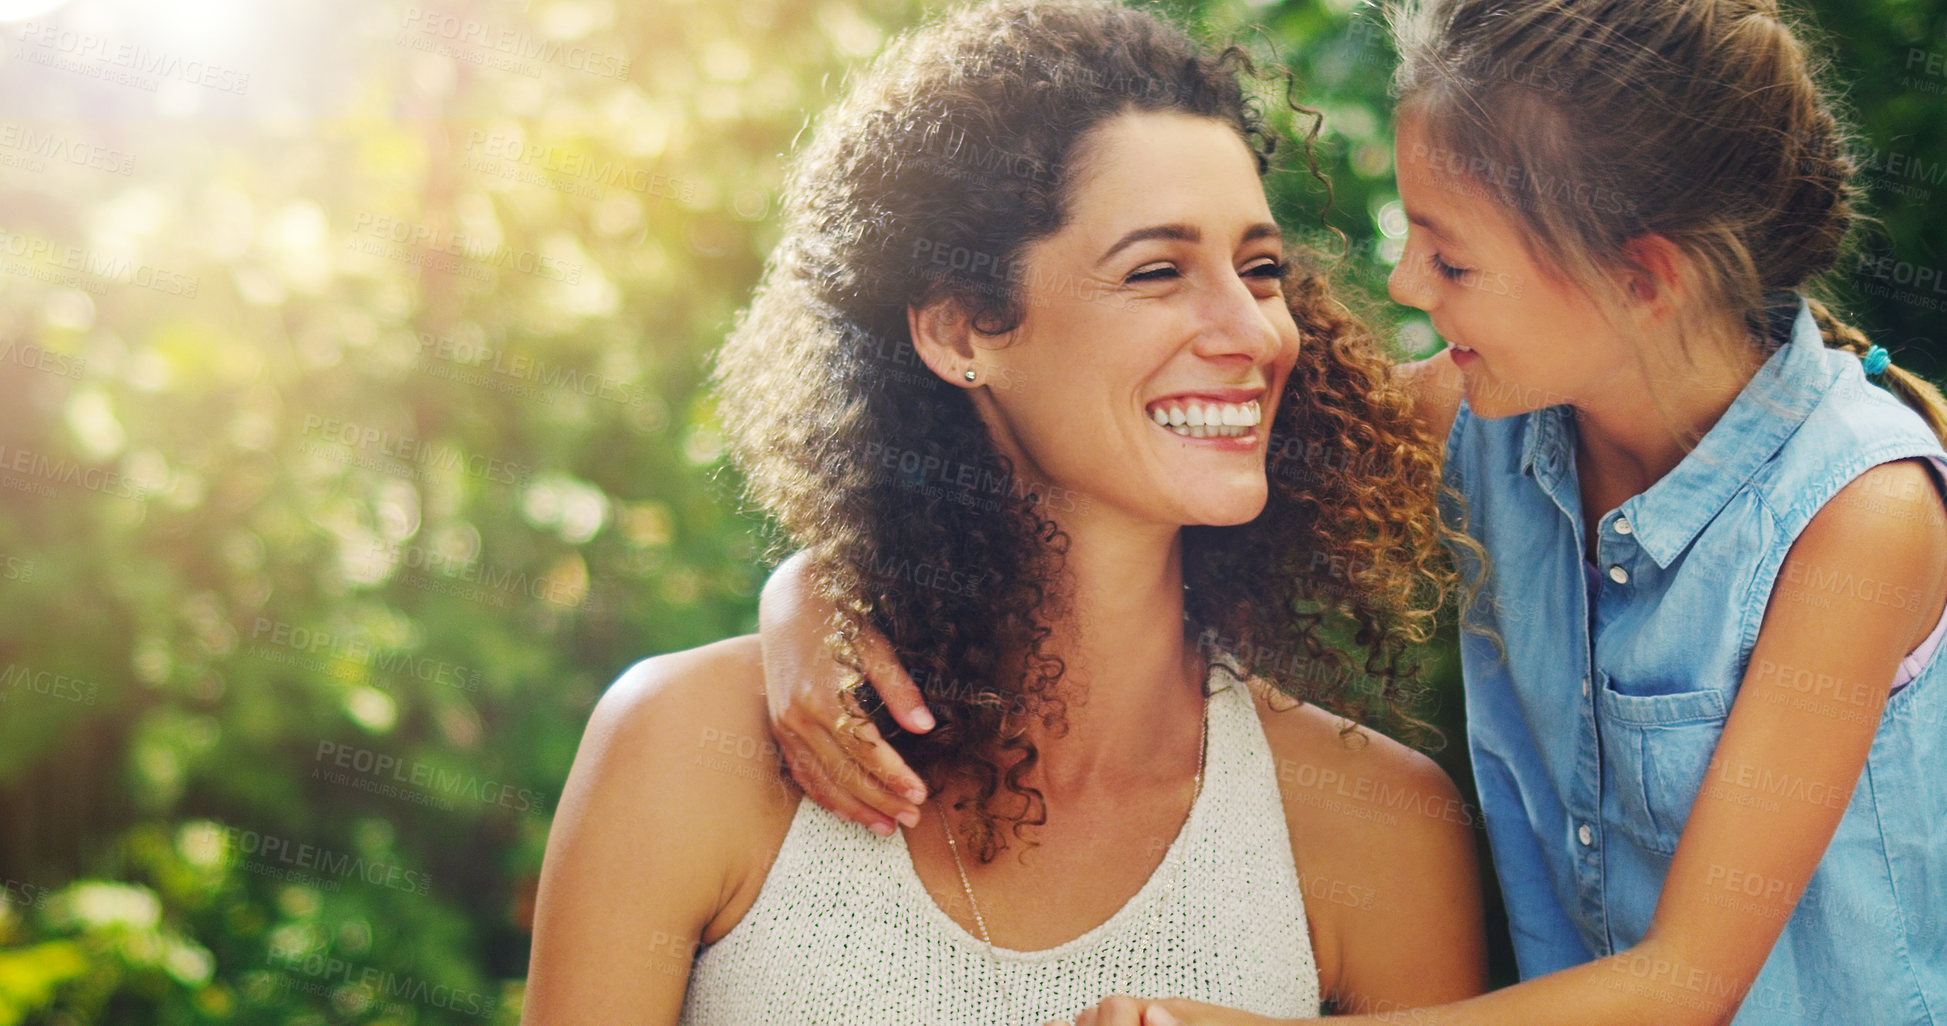 Buy stock photo Shot of an affectionate little girl spending quality time with her mother outdoors